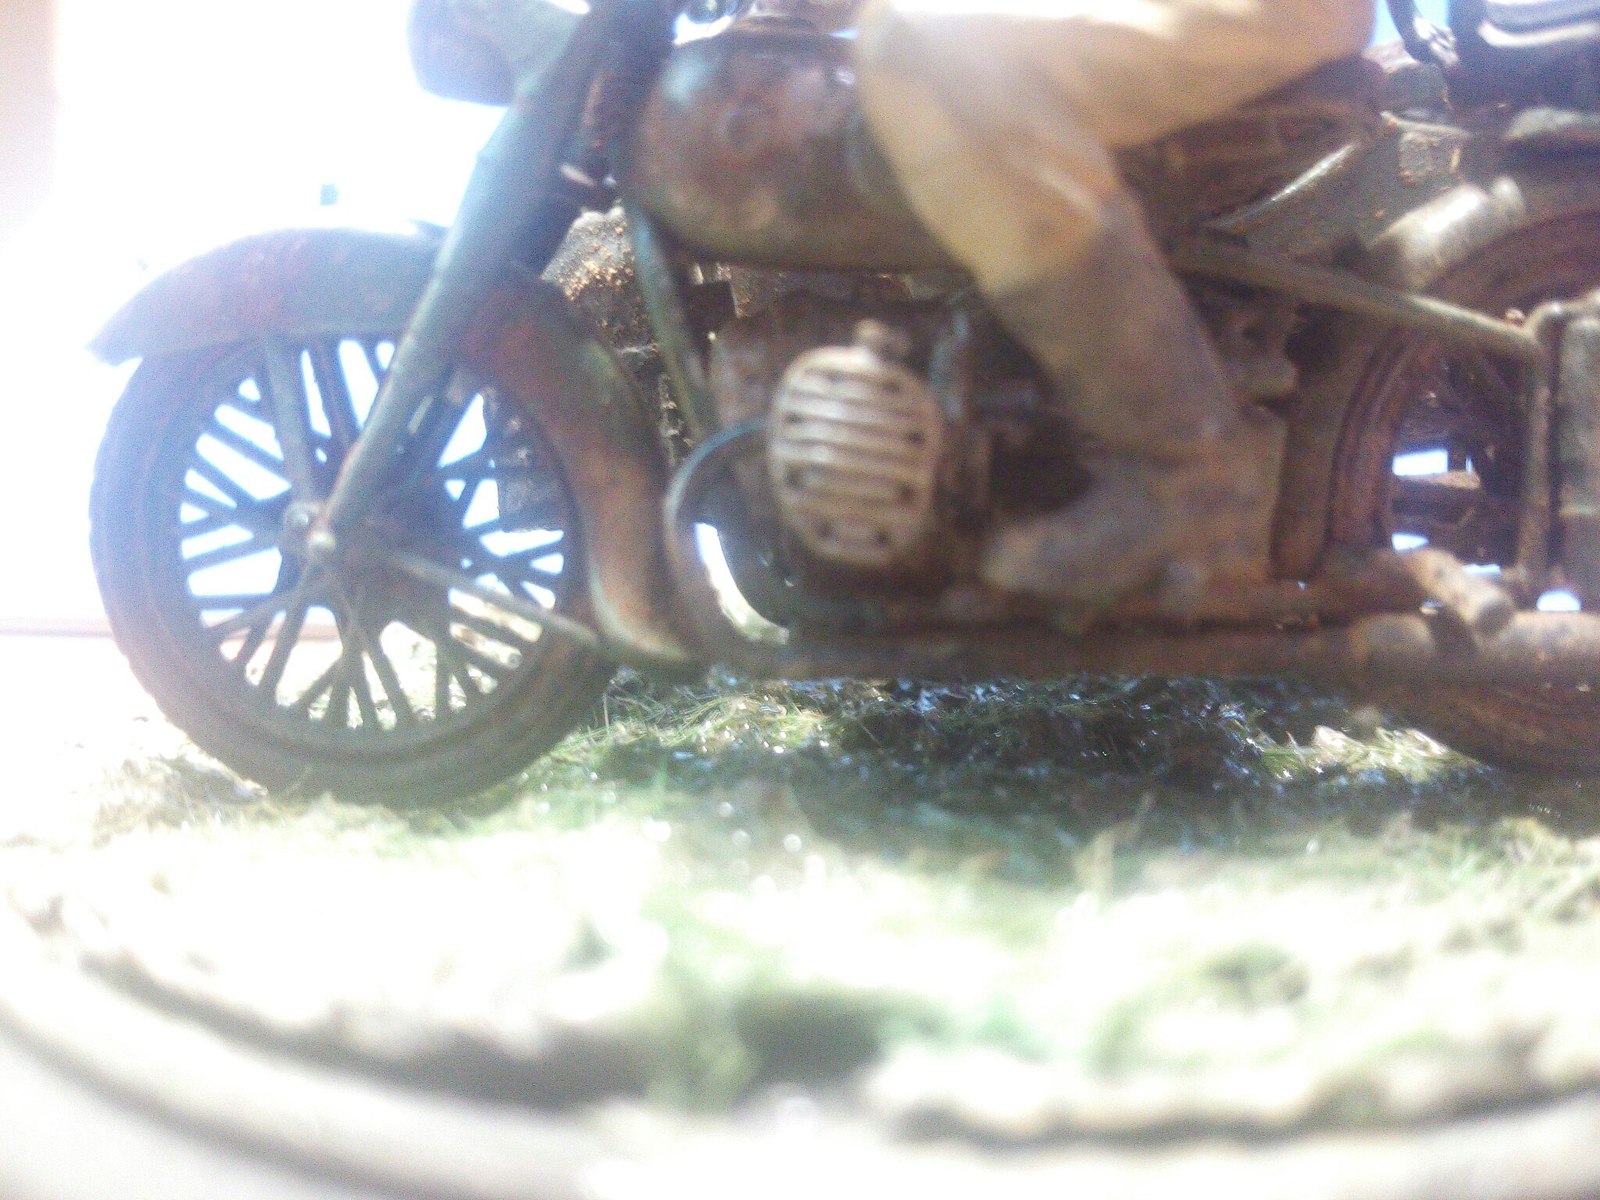 Diorama with motorcycle M-72 Celebration in honor of victory - My, Stand modeling, Miniature, M-72, Motorcycles, Longpost, Moto